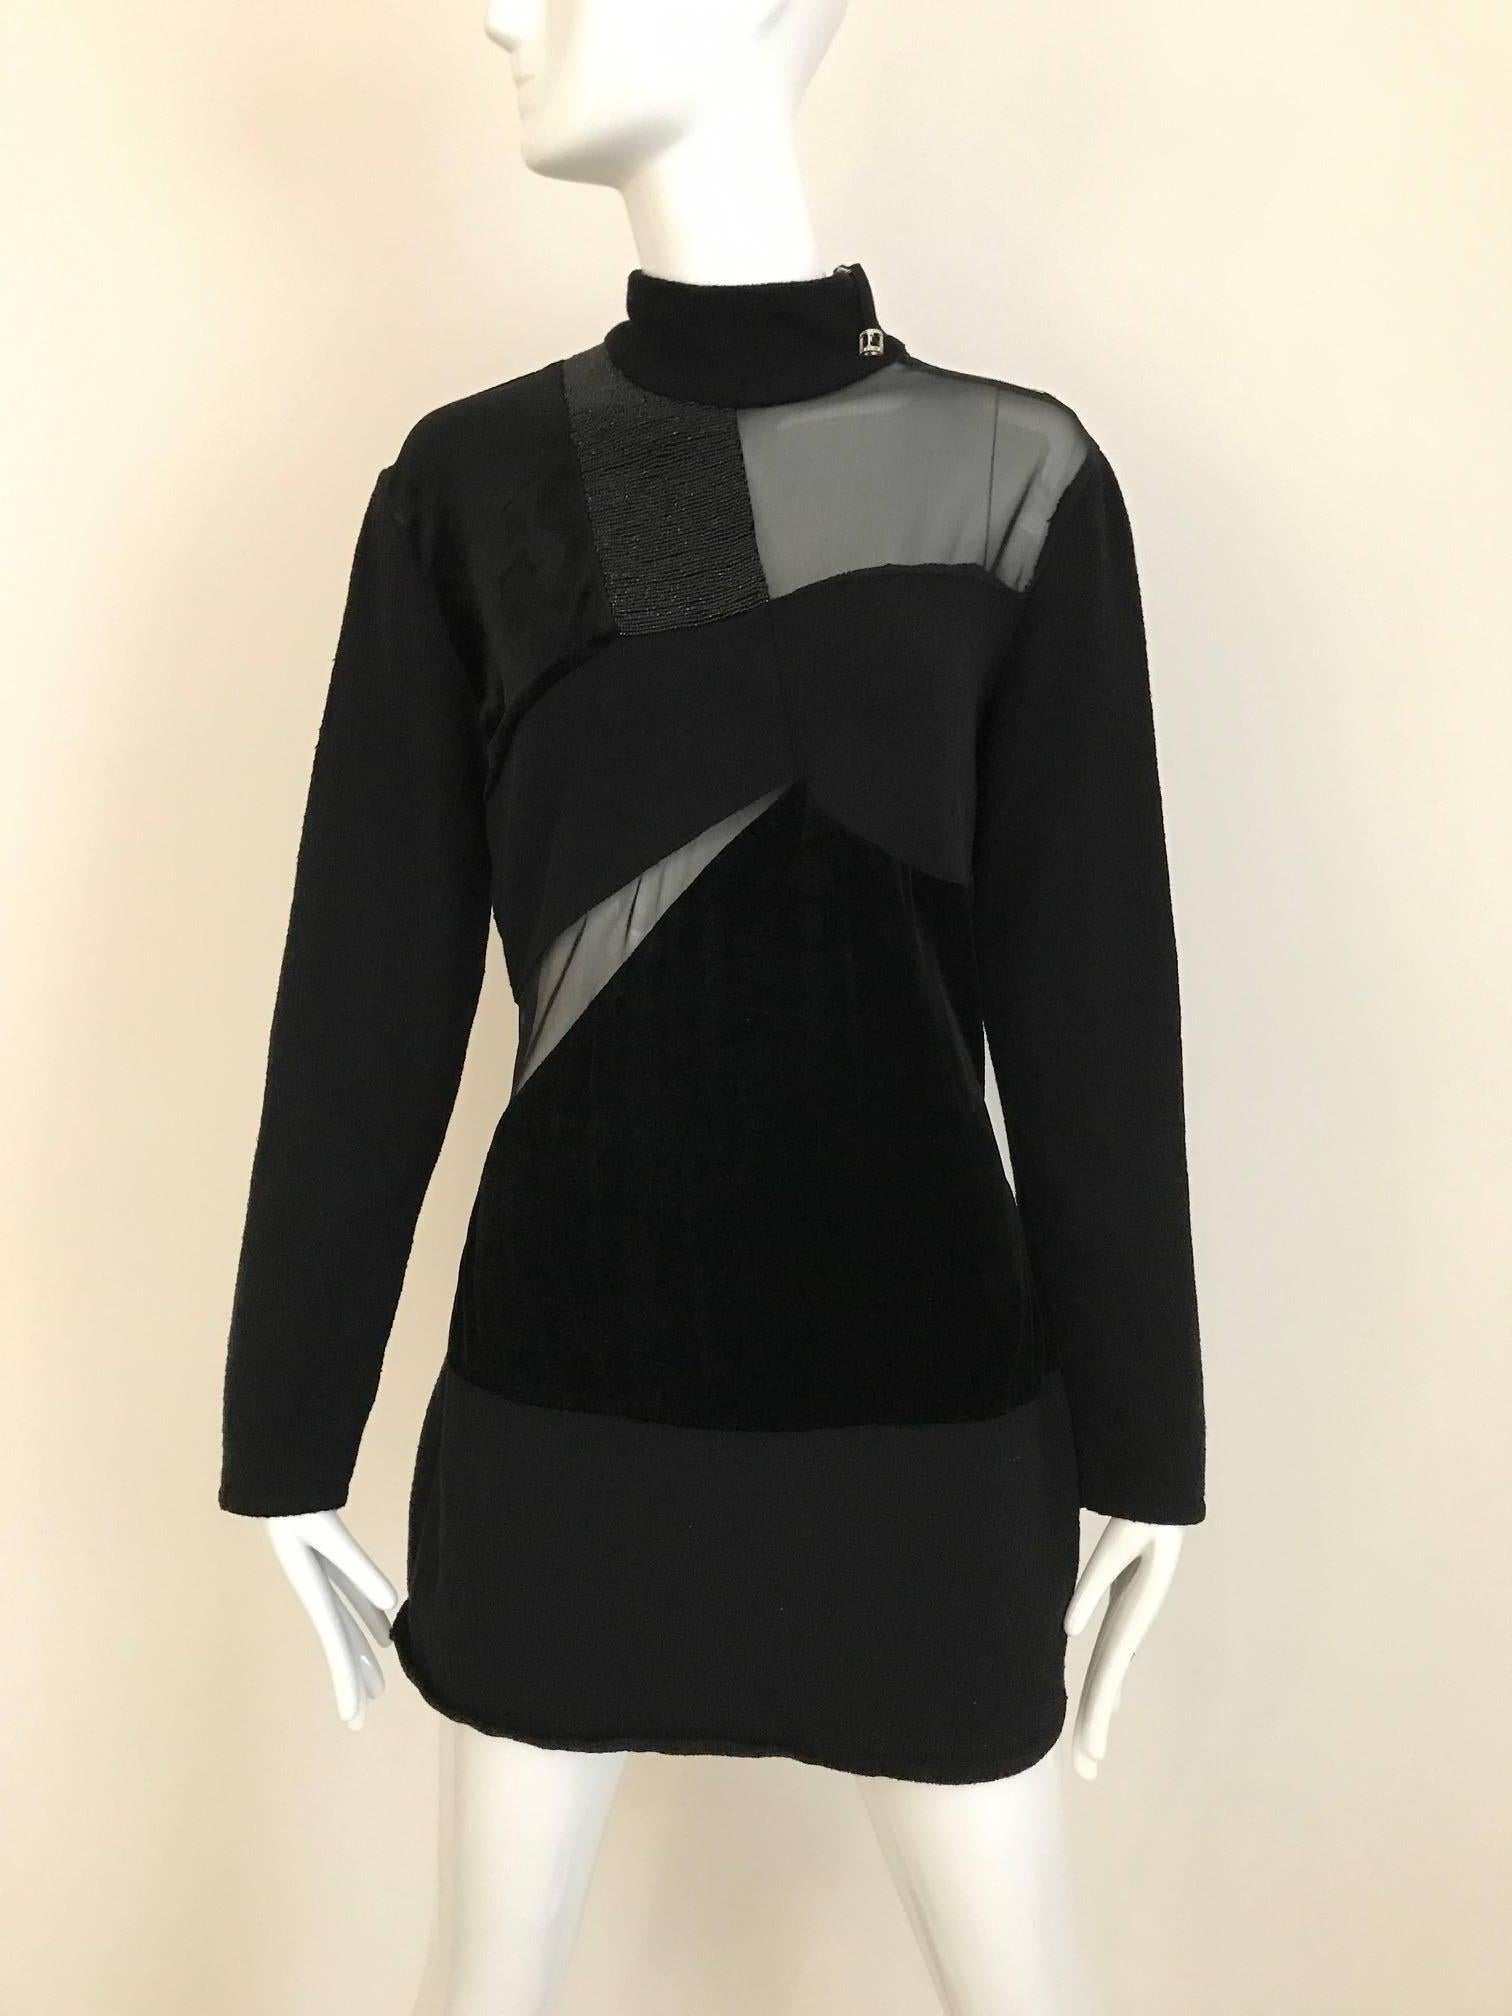 1980s Gianfranco Ferre Black Velour Sheer Long Sleeve mini knit sweater  dress or Top. 
Size: Medium  
Bust : 36  stretch up to 40